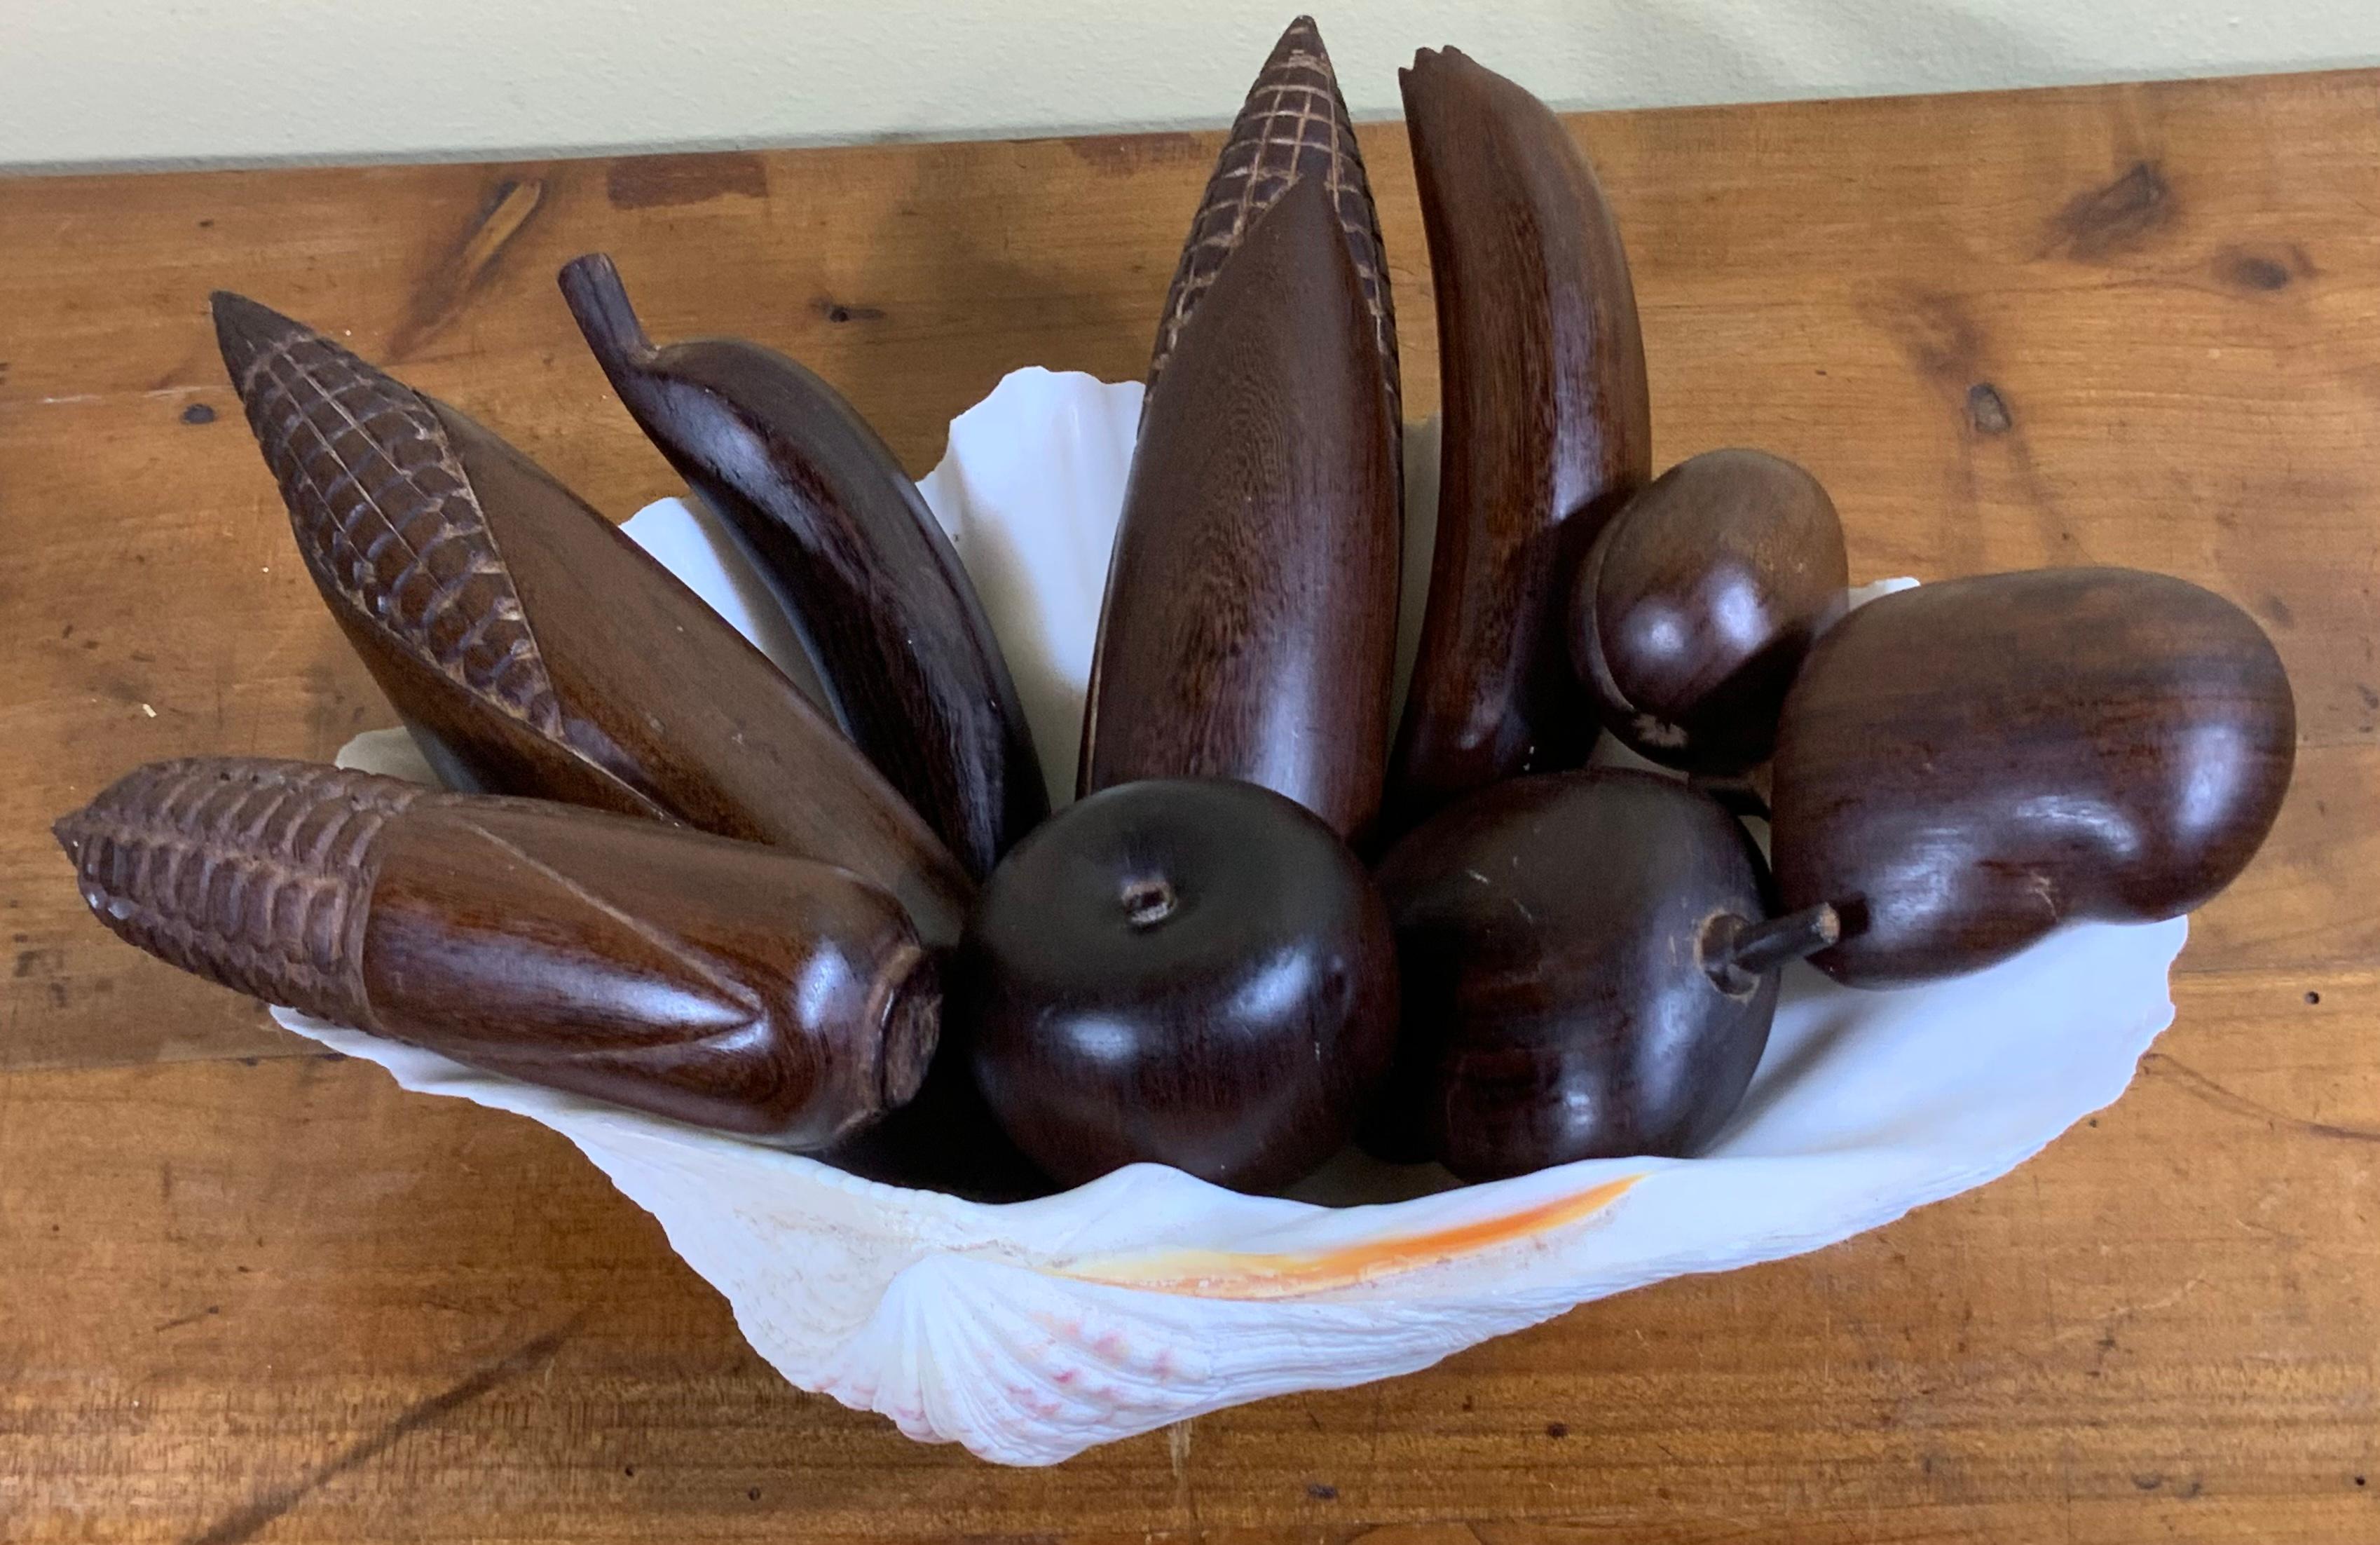 Beautifully carved set of nine pieces hand carving solid wood fruit, corn mango banana apples and small prune, shell is not included.
Approximately sizes :
Banana 7” long 
Corn 9” x 2”.5
Baby corn 6”
Mango 3”.5 x 3”
Apple 2”.5 x 2”
Prune 2”.5